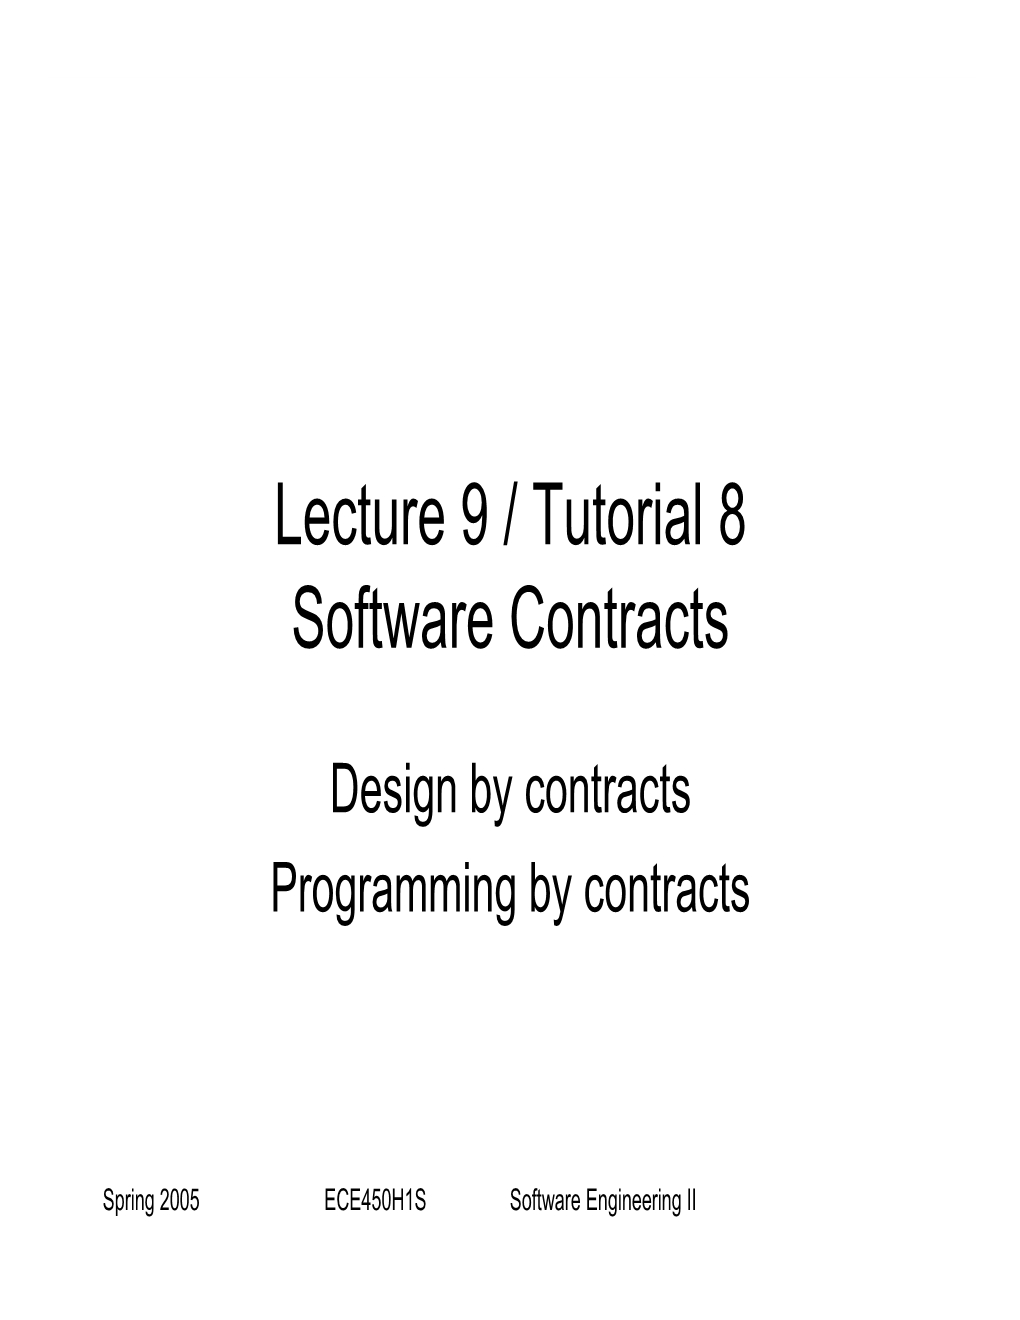 Lecture 9 / Tutorial 8 Software Contracts